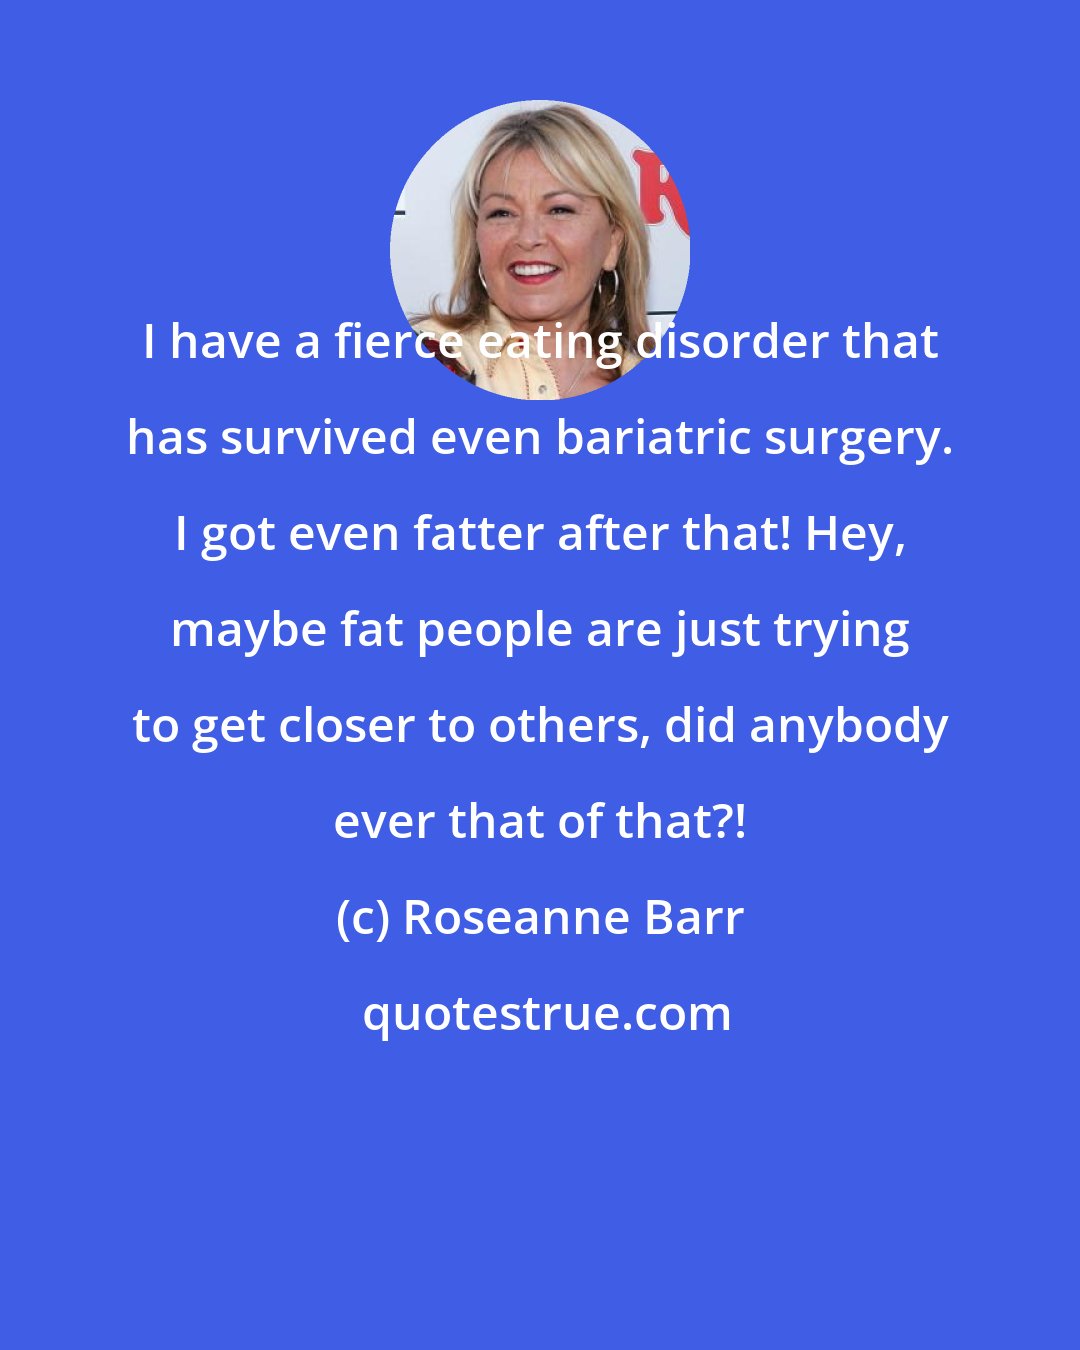 Roseanne Barr: I have a fierce eating disorder that has survived even bariatric surgery. I got even fatter after that! Hey, maybe fat people are just trying to get closer to others, did anybody ever that of that?!